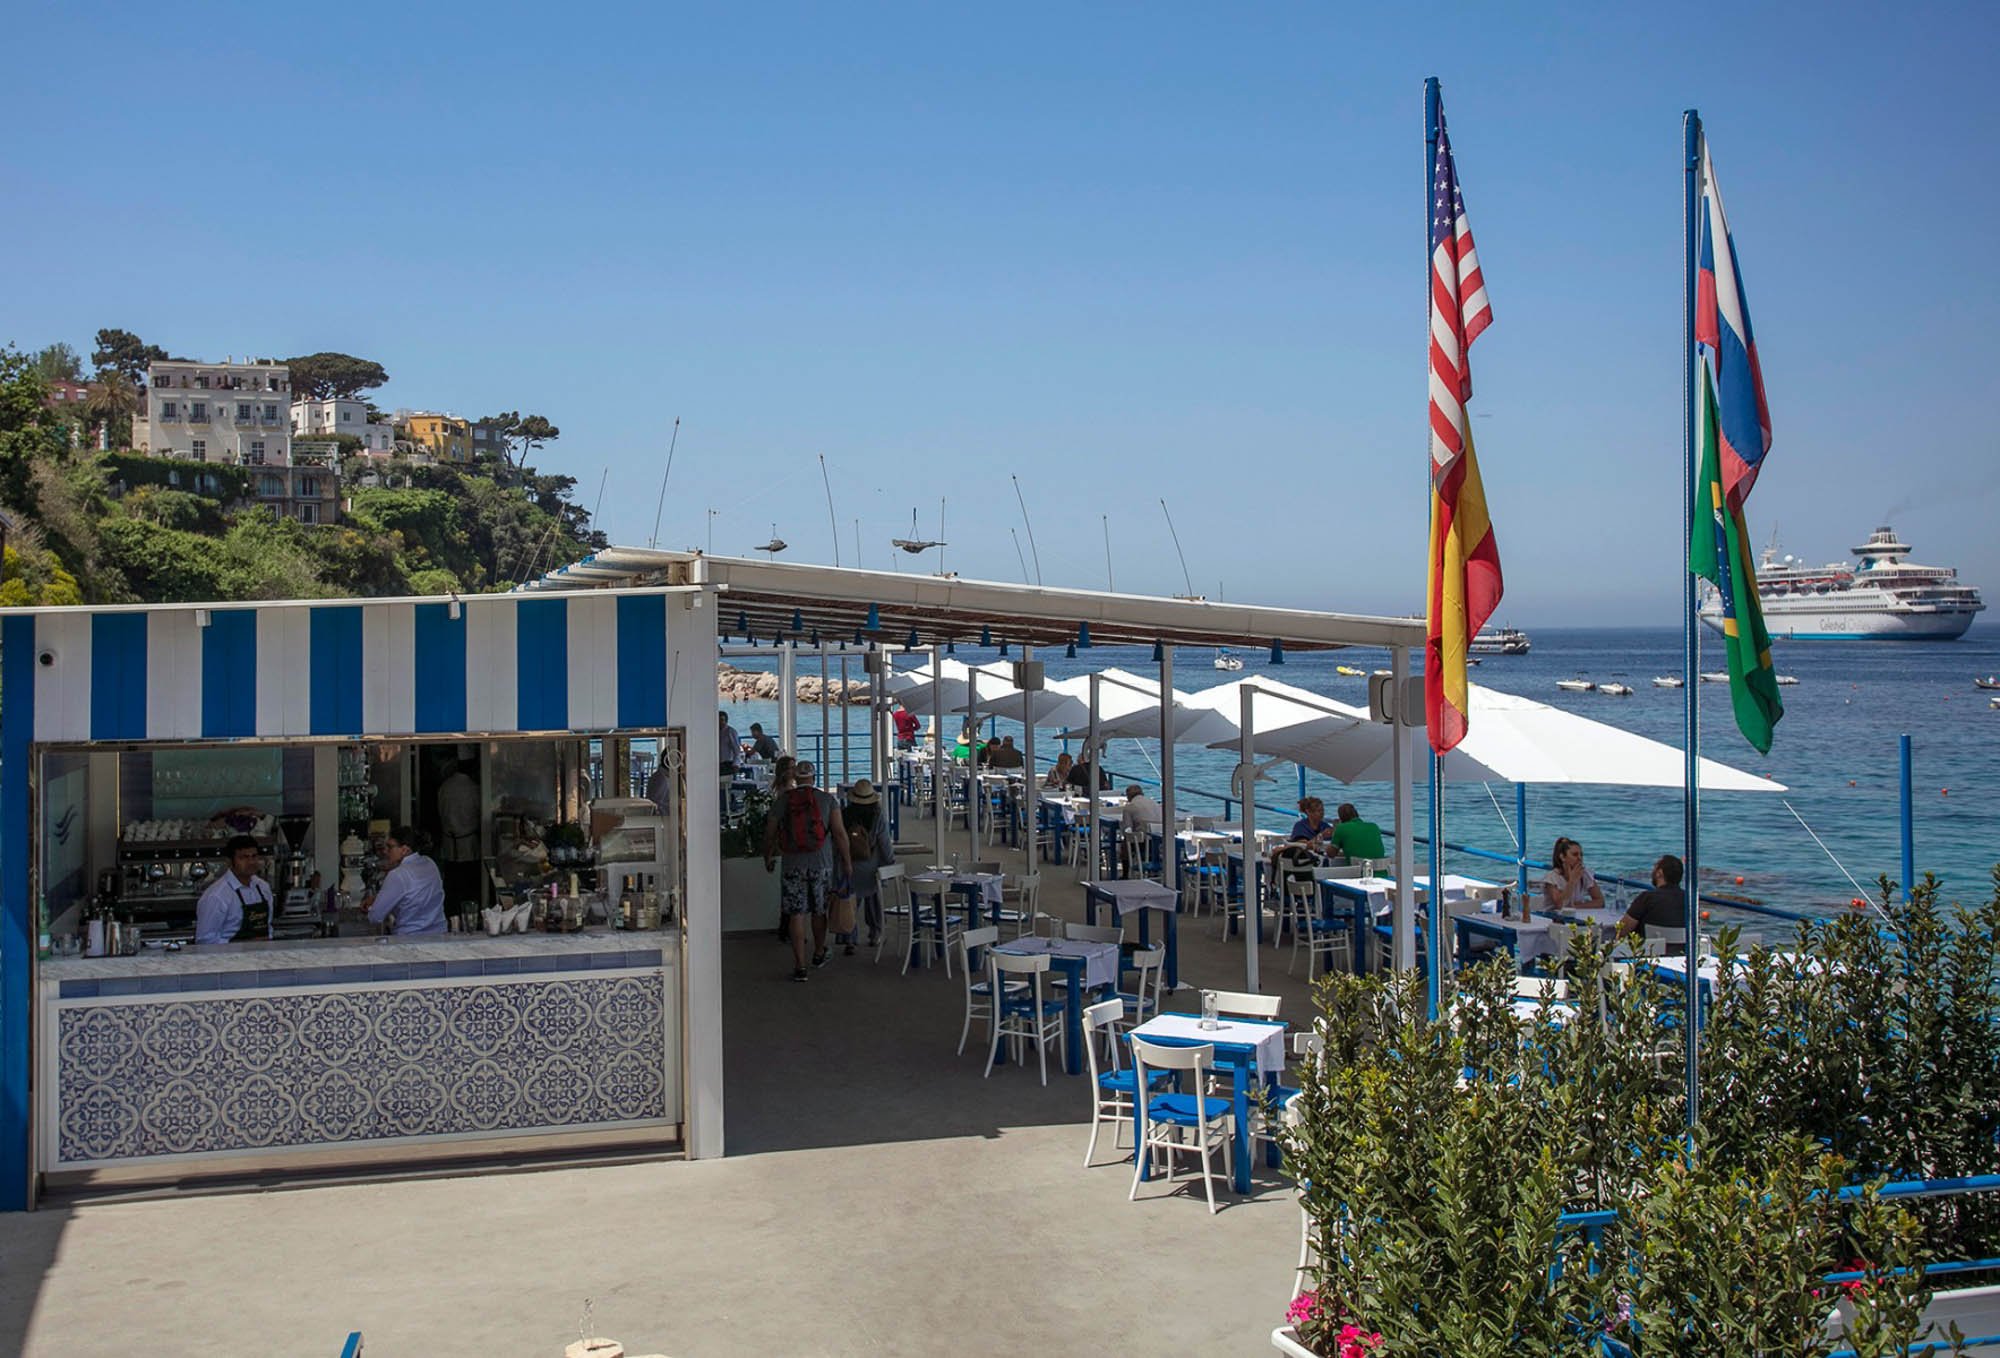 Le Ondine Beach Club is attached to the restaurant Da Gemma, a popular spot for those looking for a restaurant in Marina Grande Capri